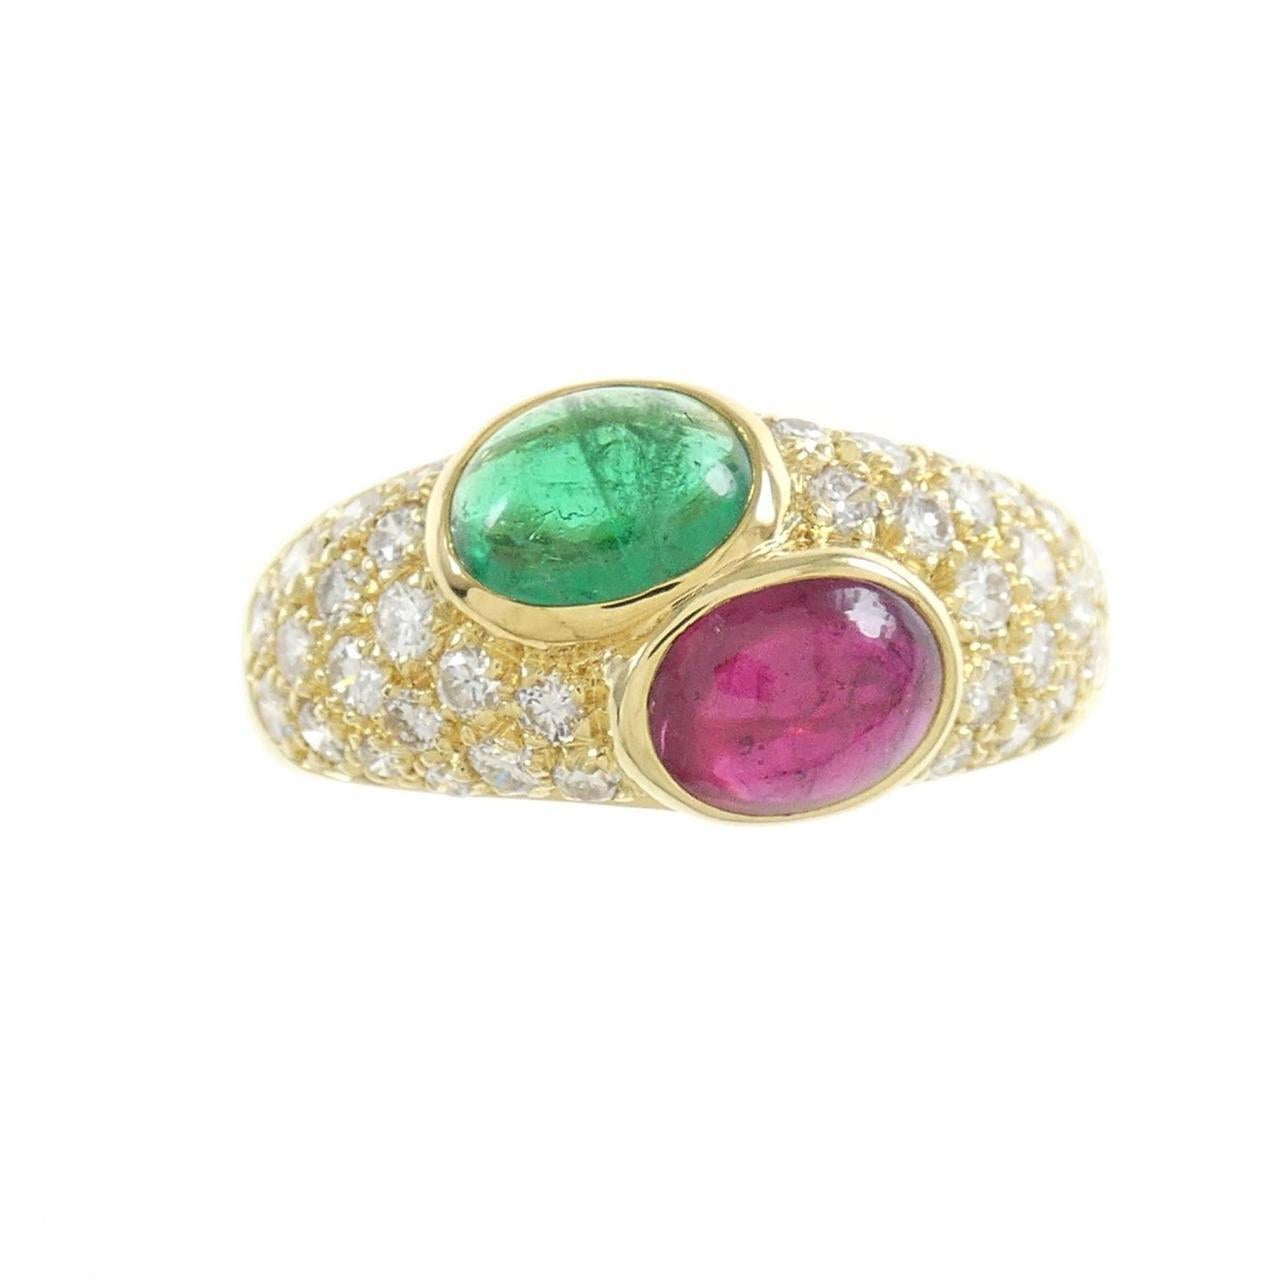 Bvlgari Made in France 18k Yellow Gold, Diamond, Cabochon Emerald & Ruby Ring

Here is your chance to purchase a beautiful and highly collectible designer ring

The ring size is 6.  The weight is 5.8 grams.  It is marked Bvlgari / French eagle